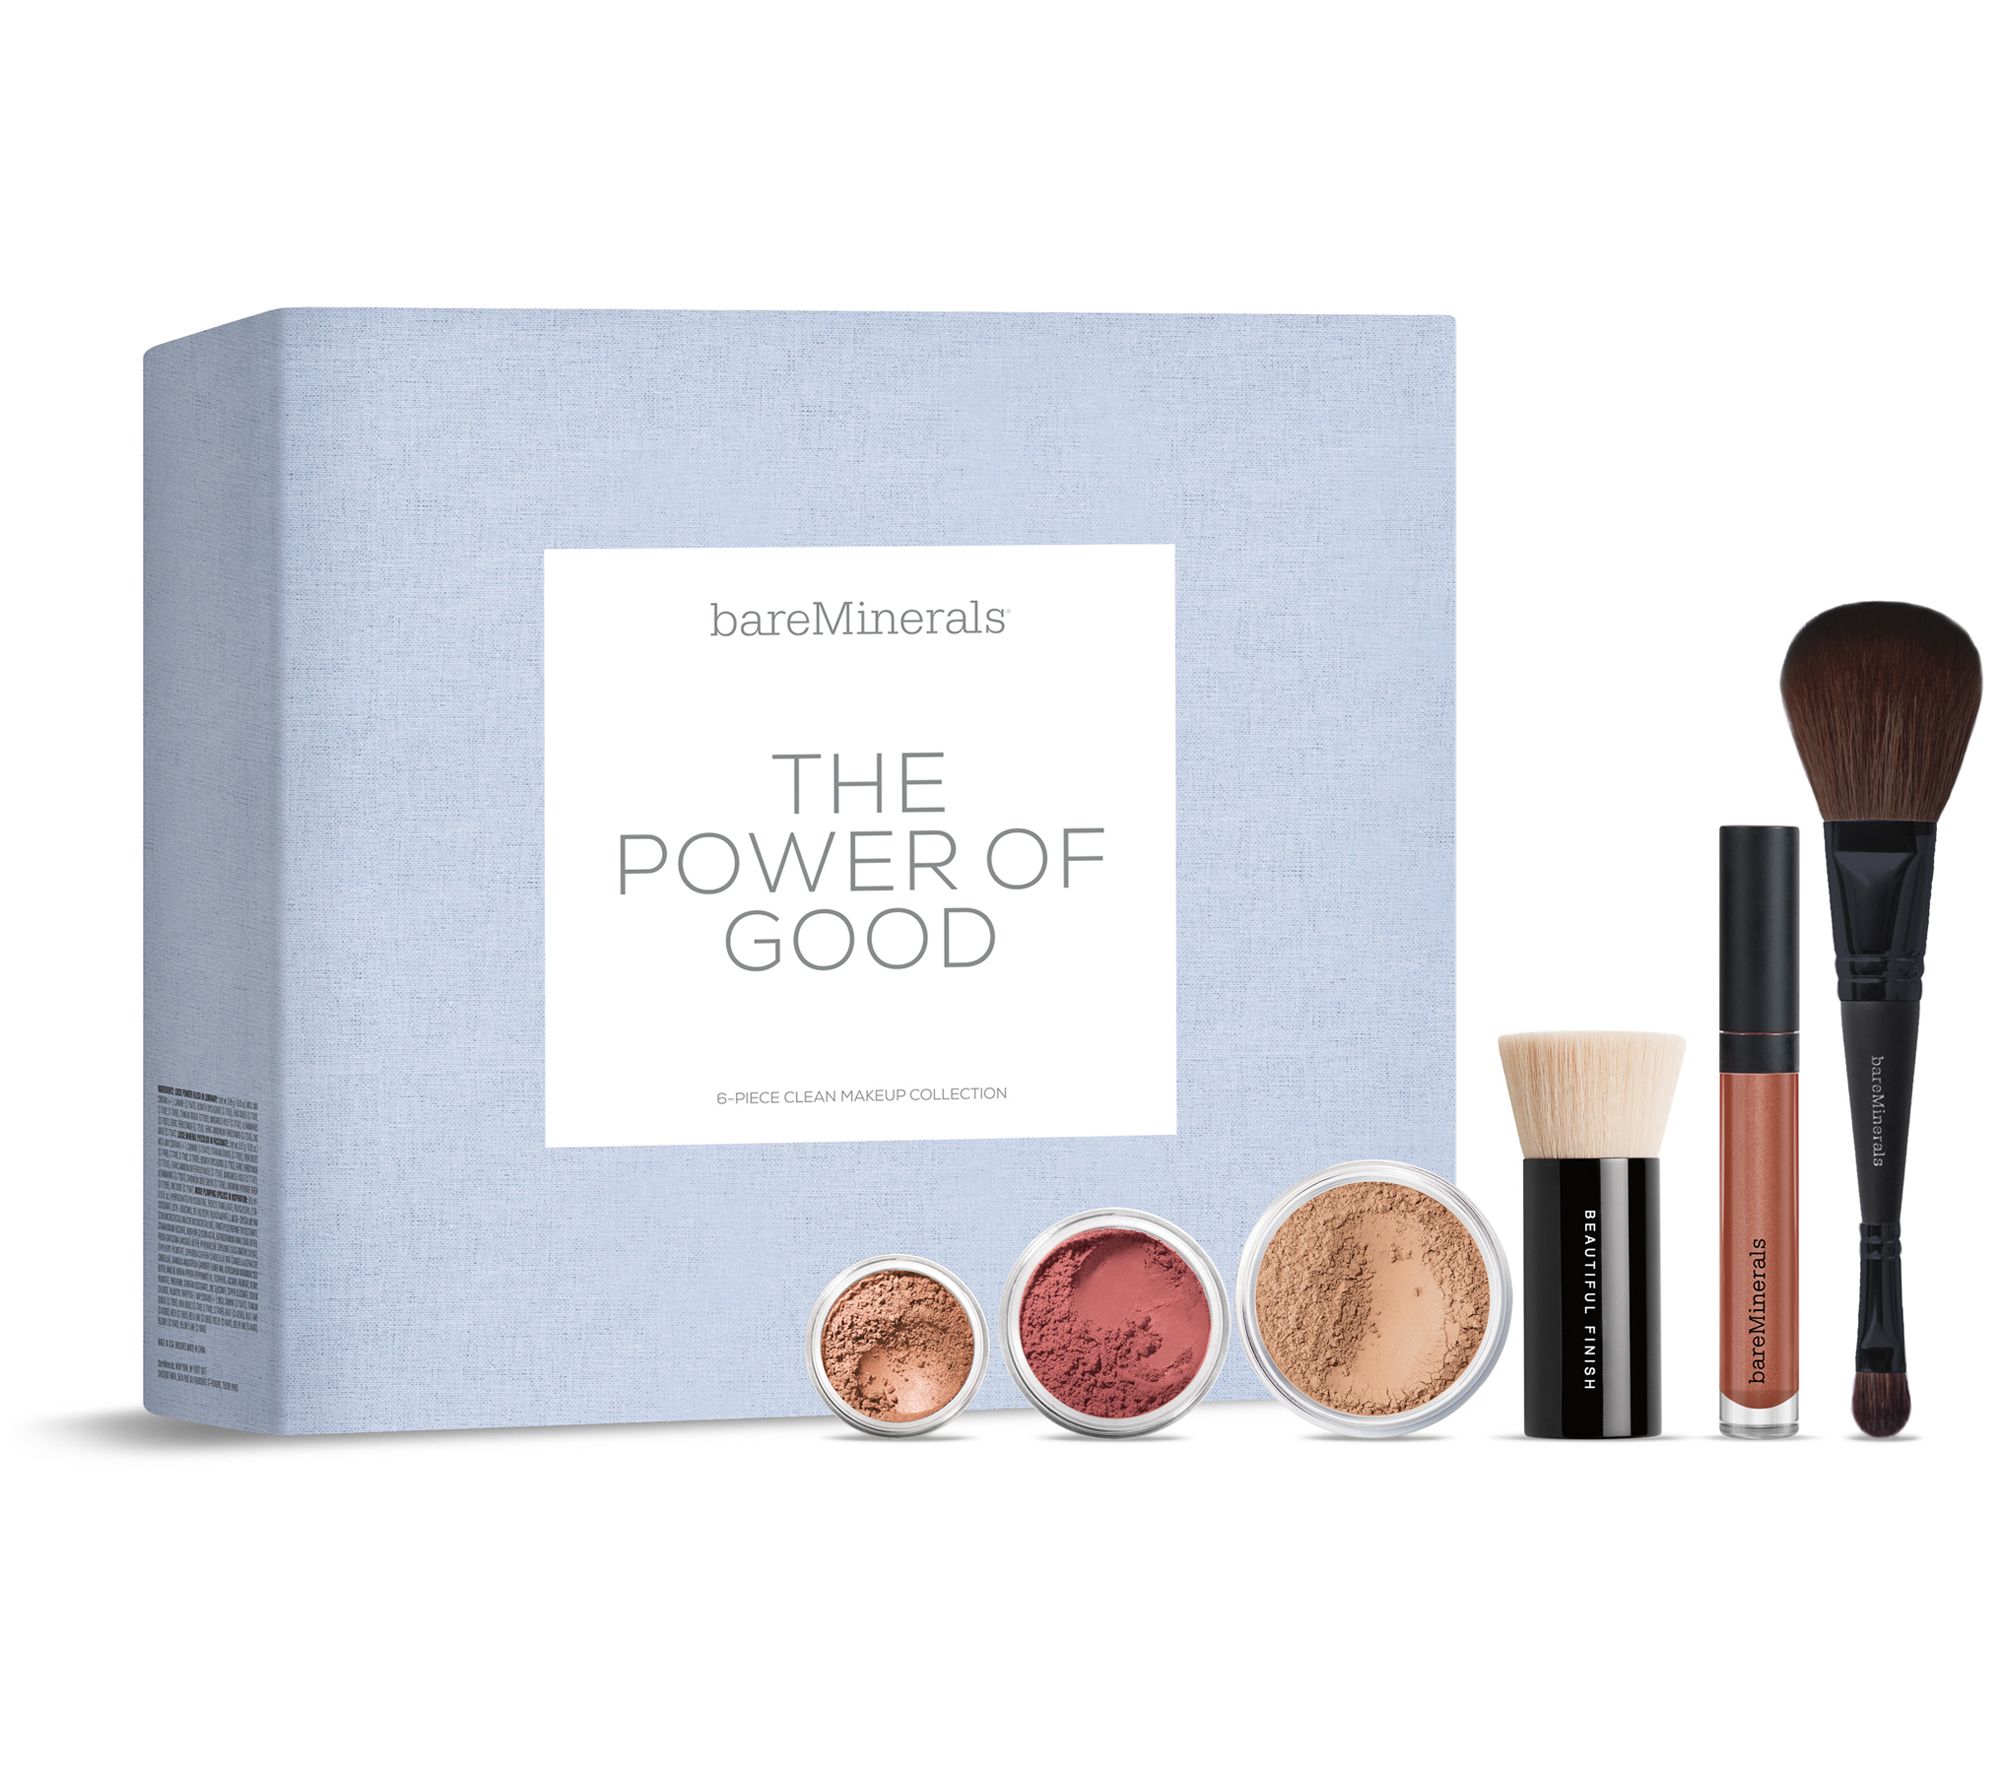 Knipperen leven boom bareMinerals Power of Good Deluxe Original Foundation 6-pc Kit - QVC.com